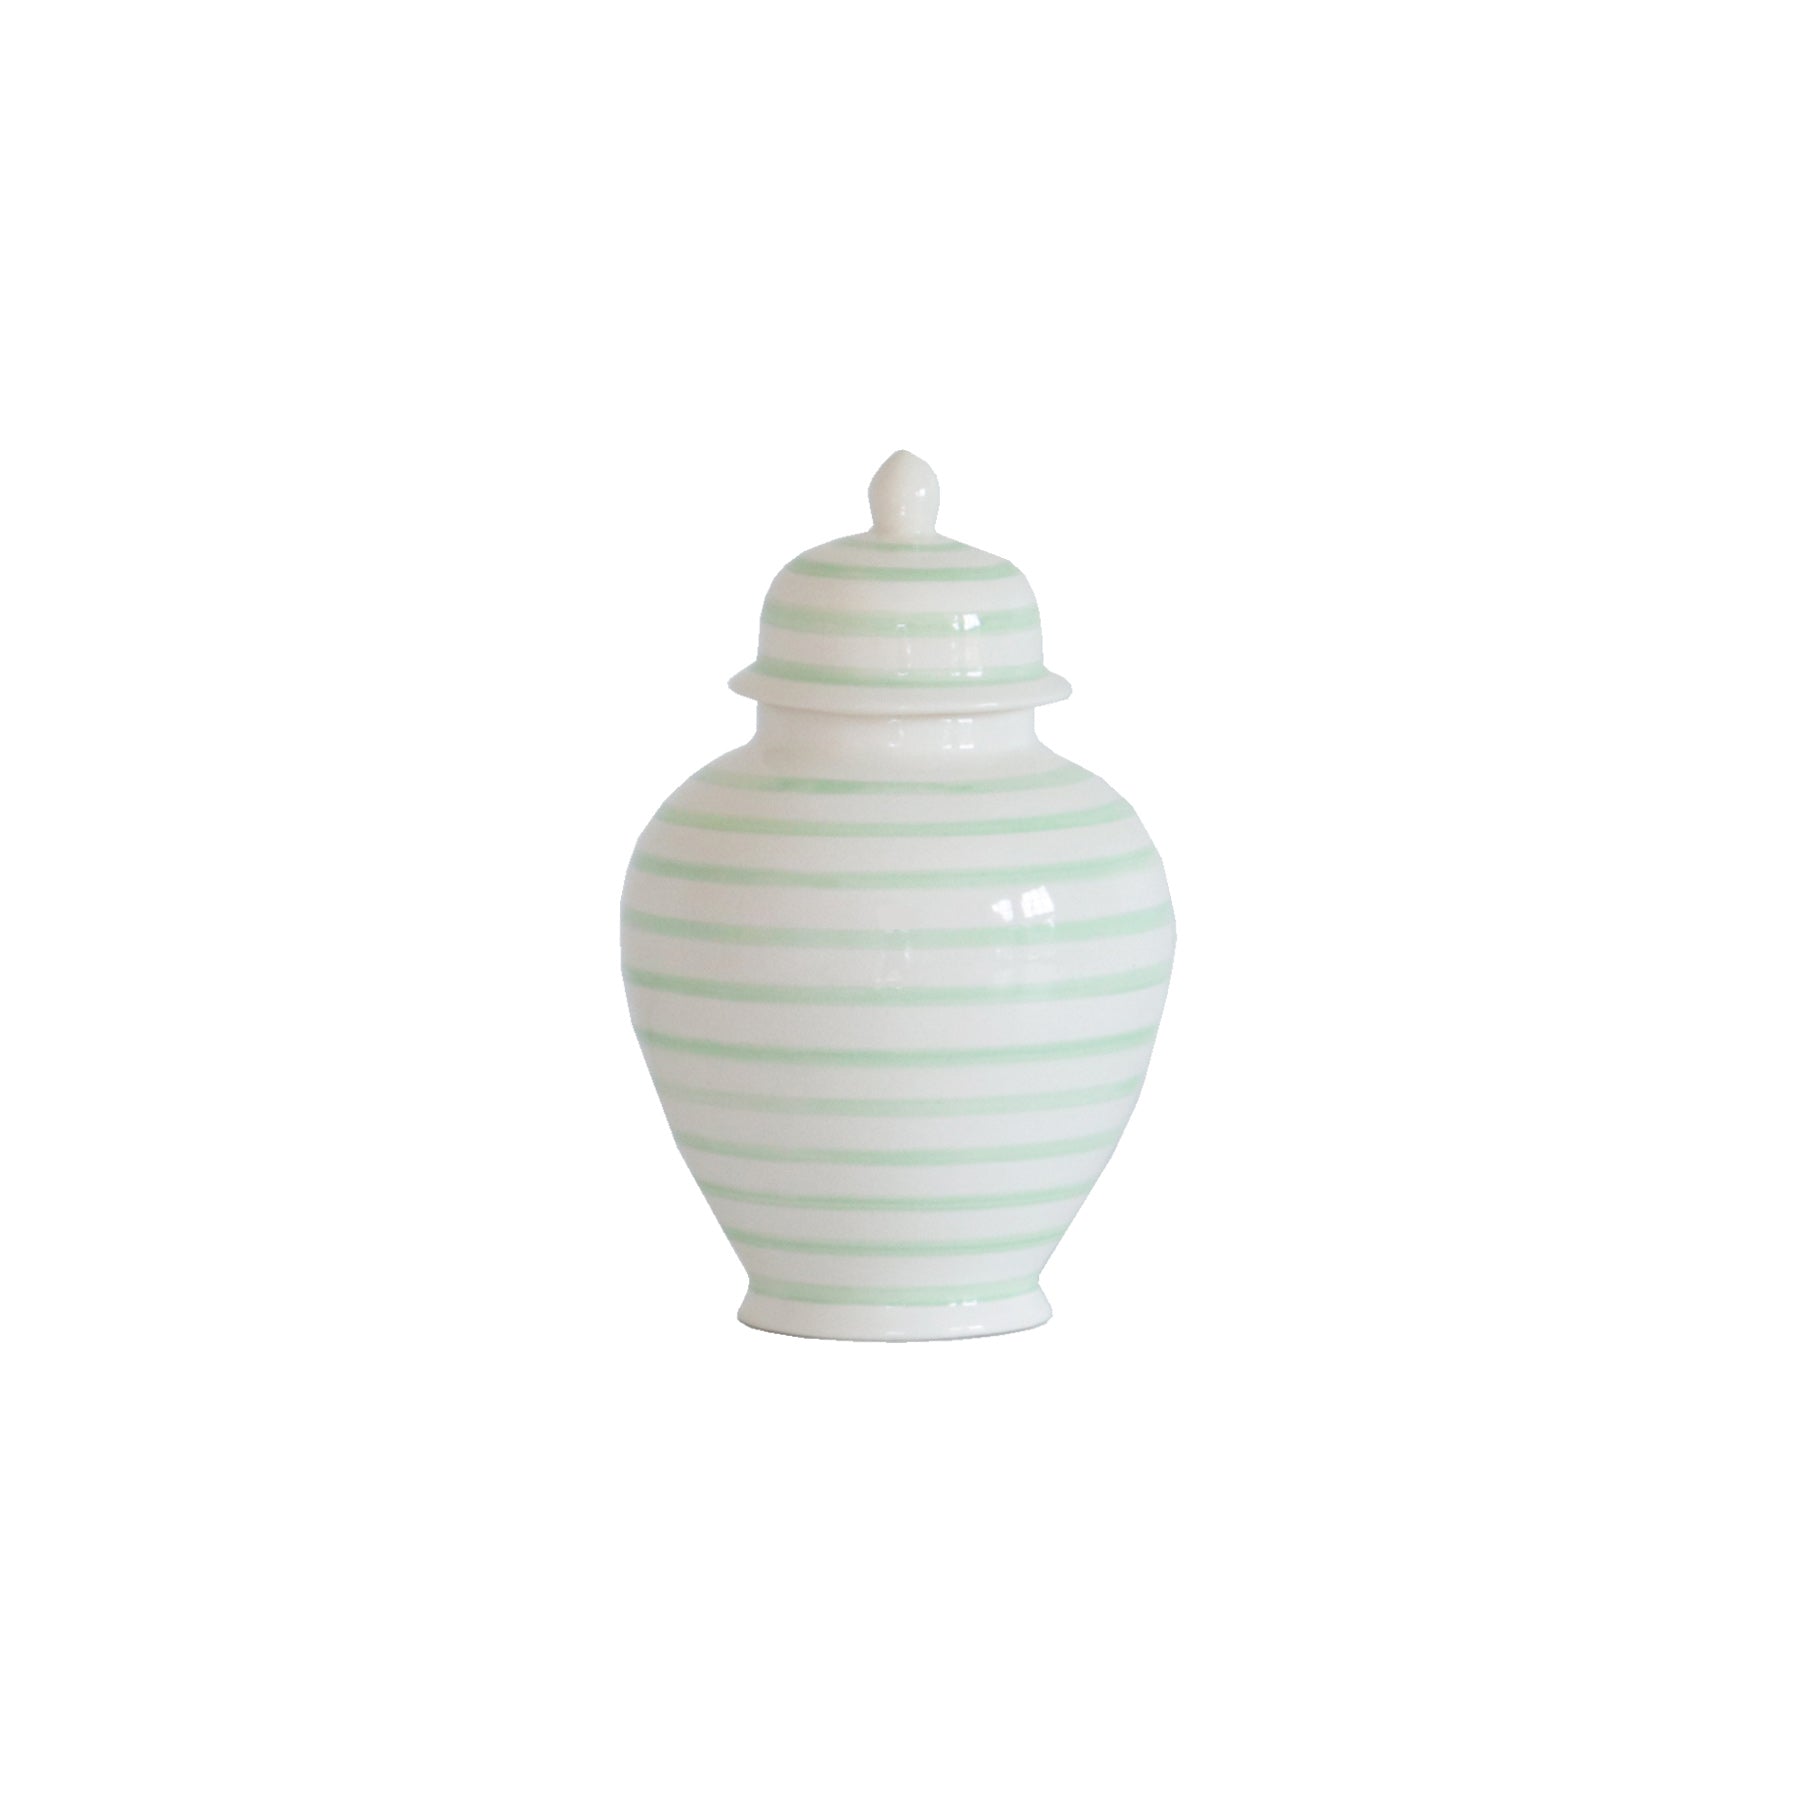 Painterly Striped Ginger Jars in Green for Lo Home x Lemon Stripes